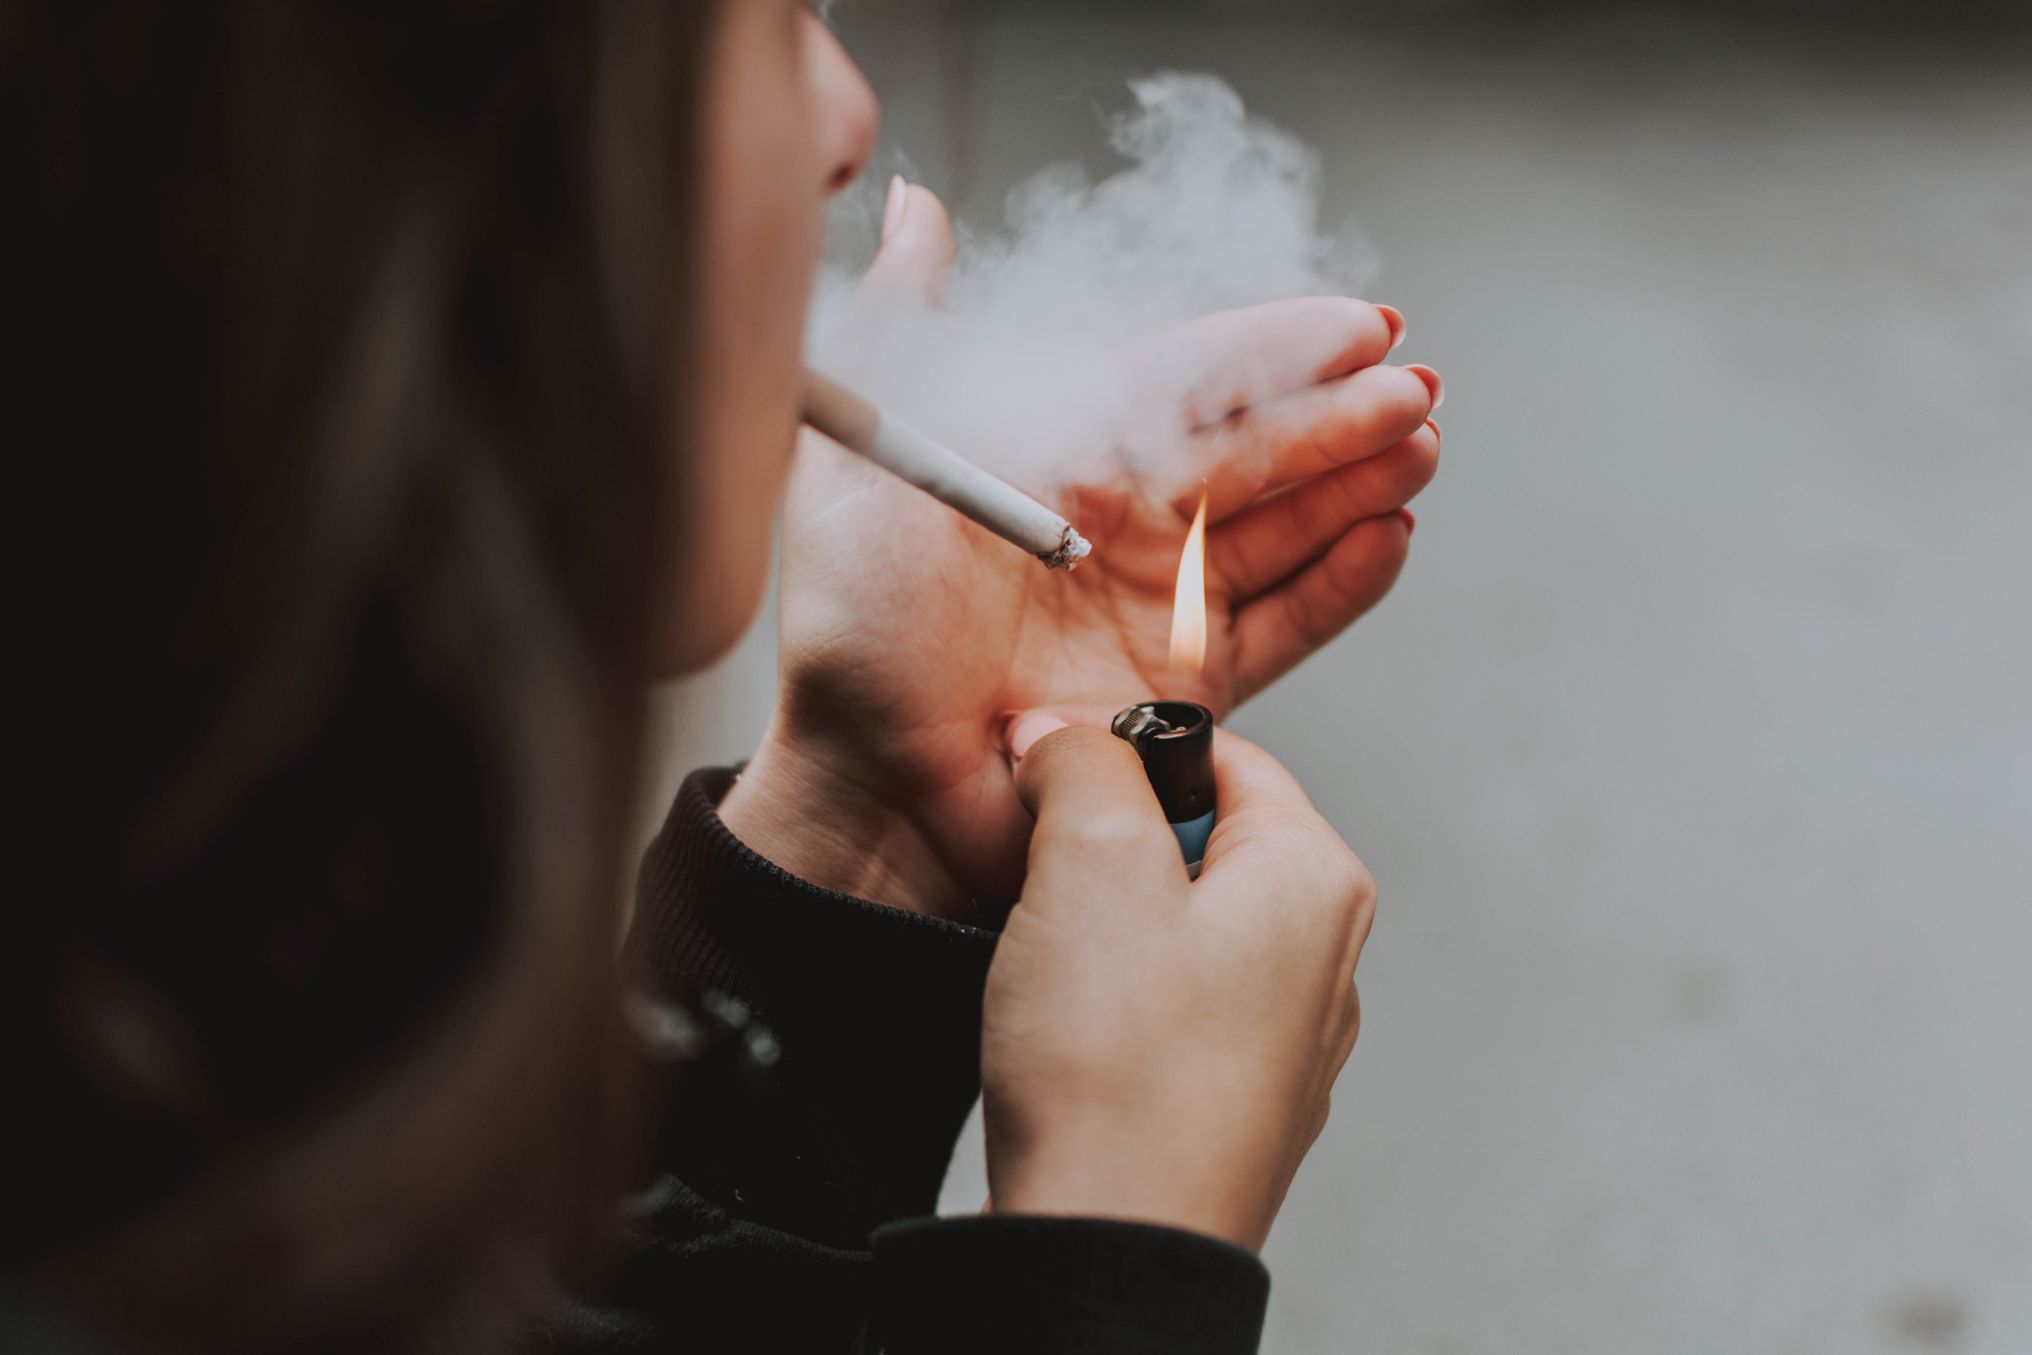 How To Pass A Nicotine Test For Health Insurance? 8 Ways